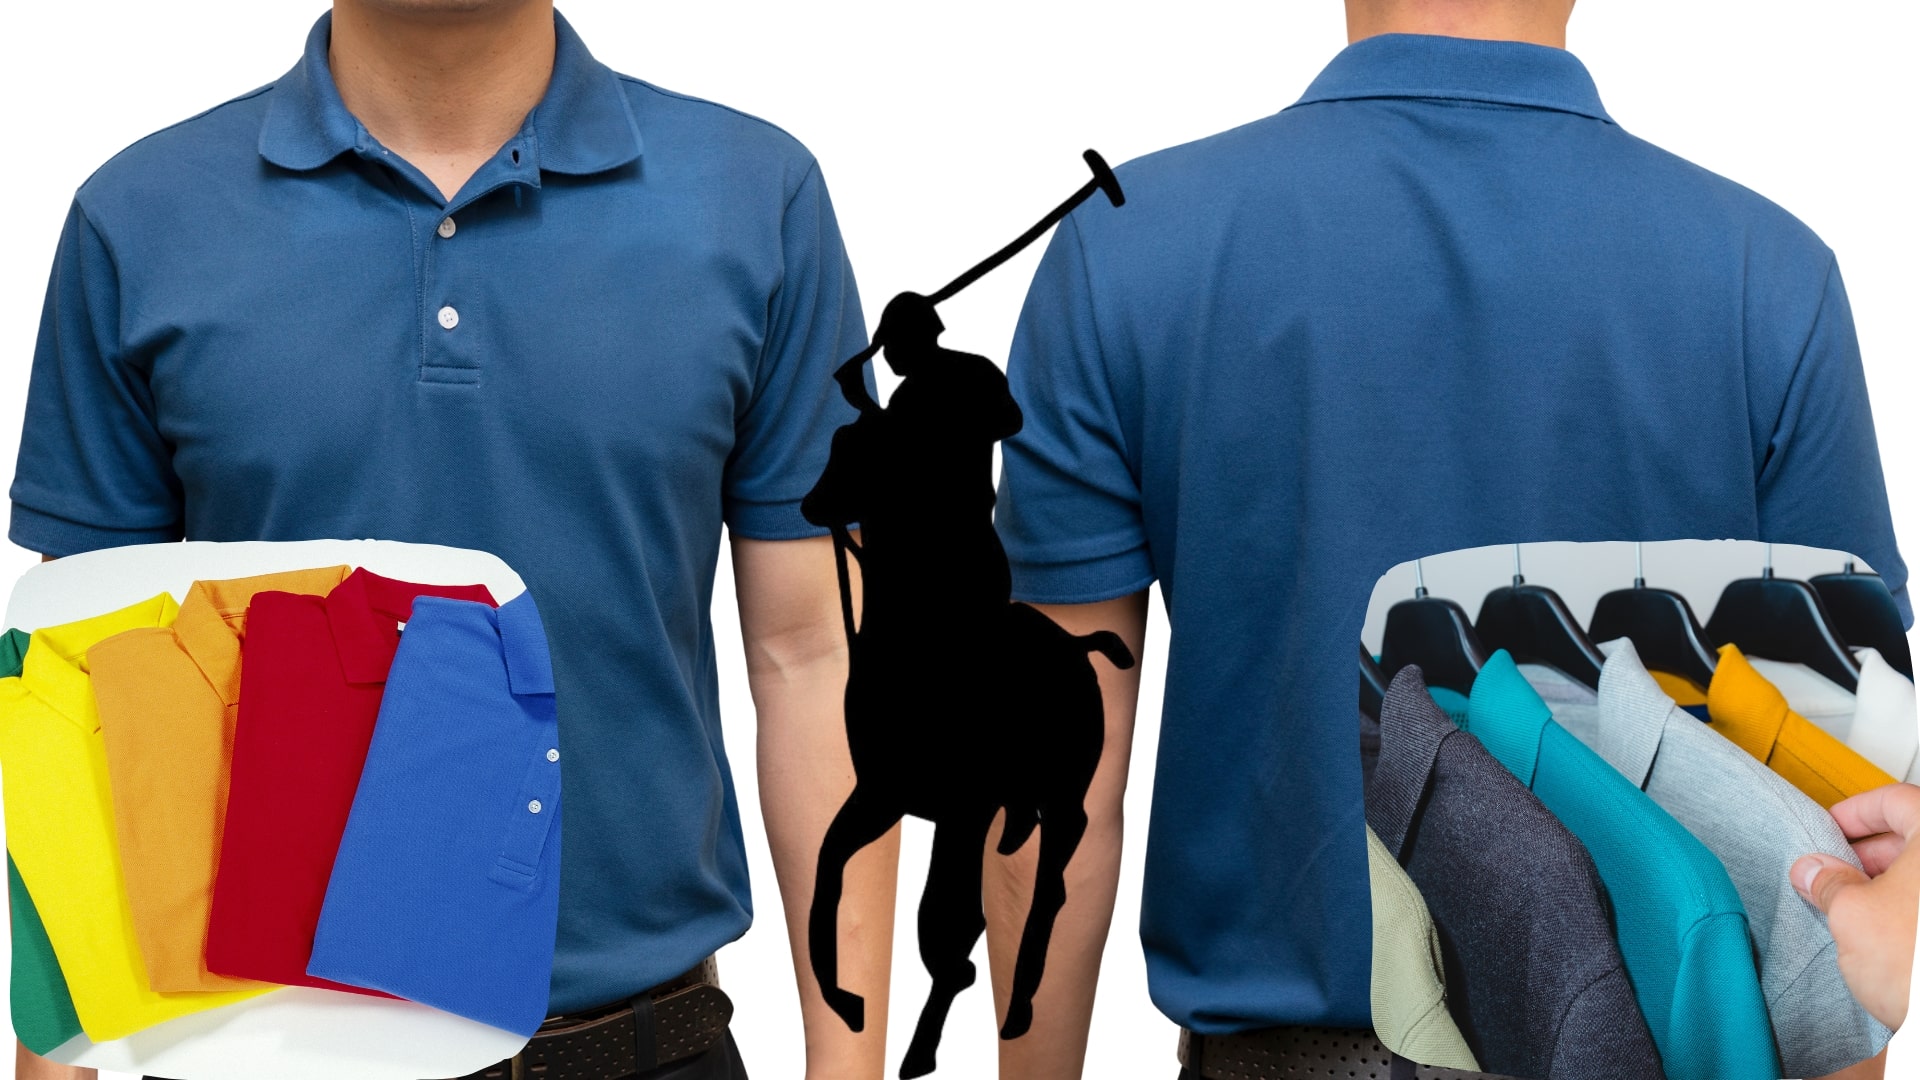 Top 5 Rocking Polo Shirts for Men